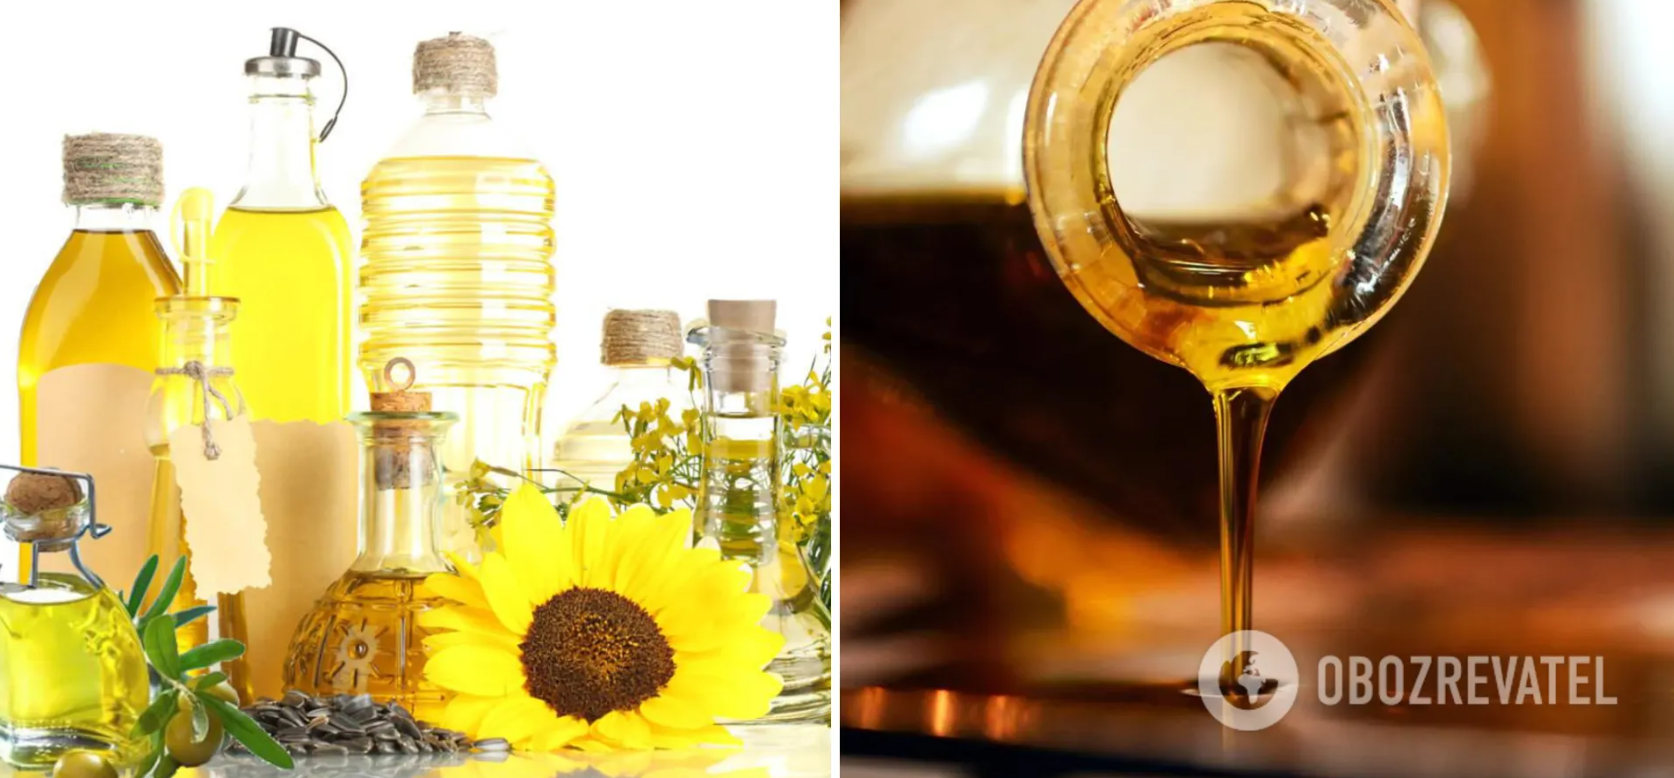 How to test vegetable oil for quality at home